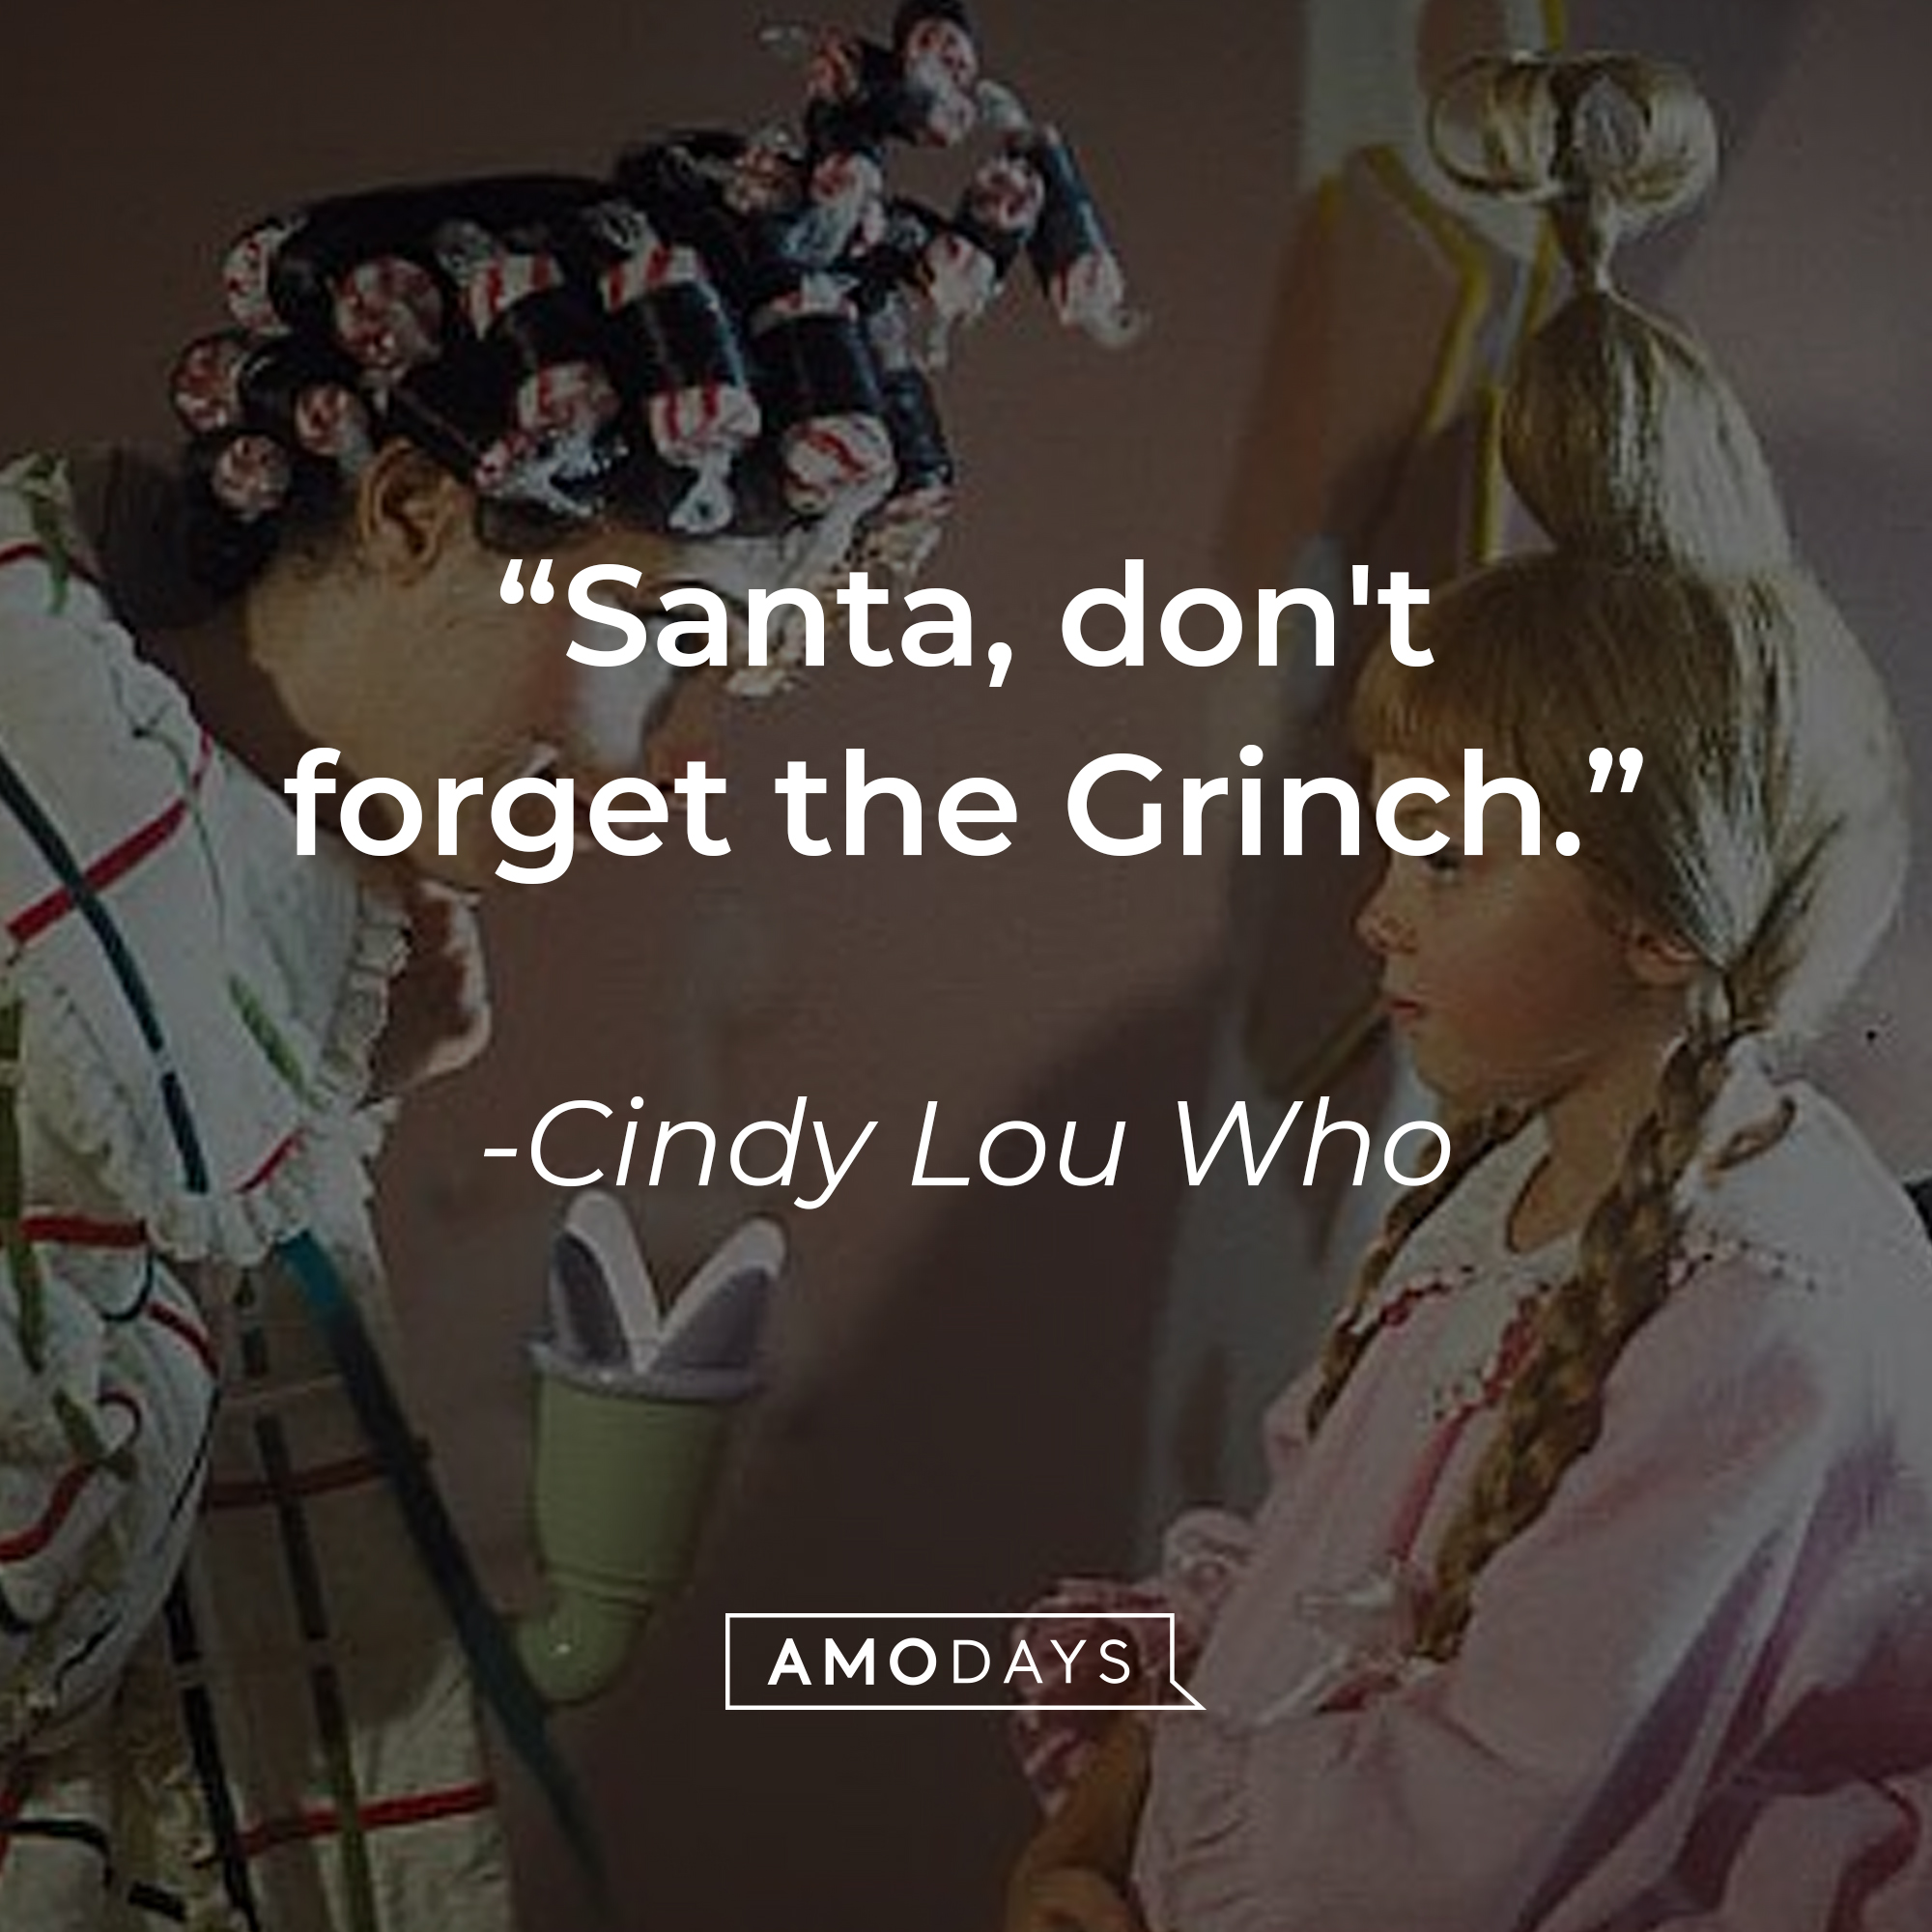 Cindy Lou Who, with her quote: "Santa, don't forget the Grinch." | Source: Youtube.com/UniversalPictures